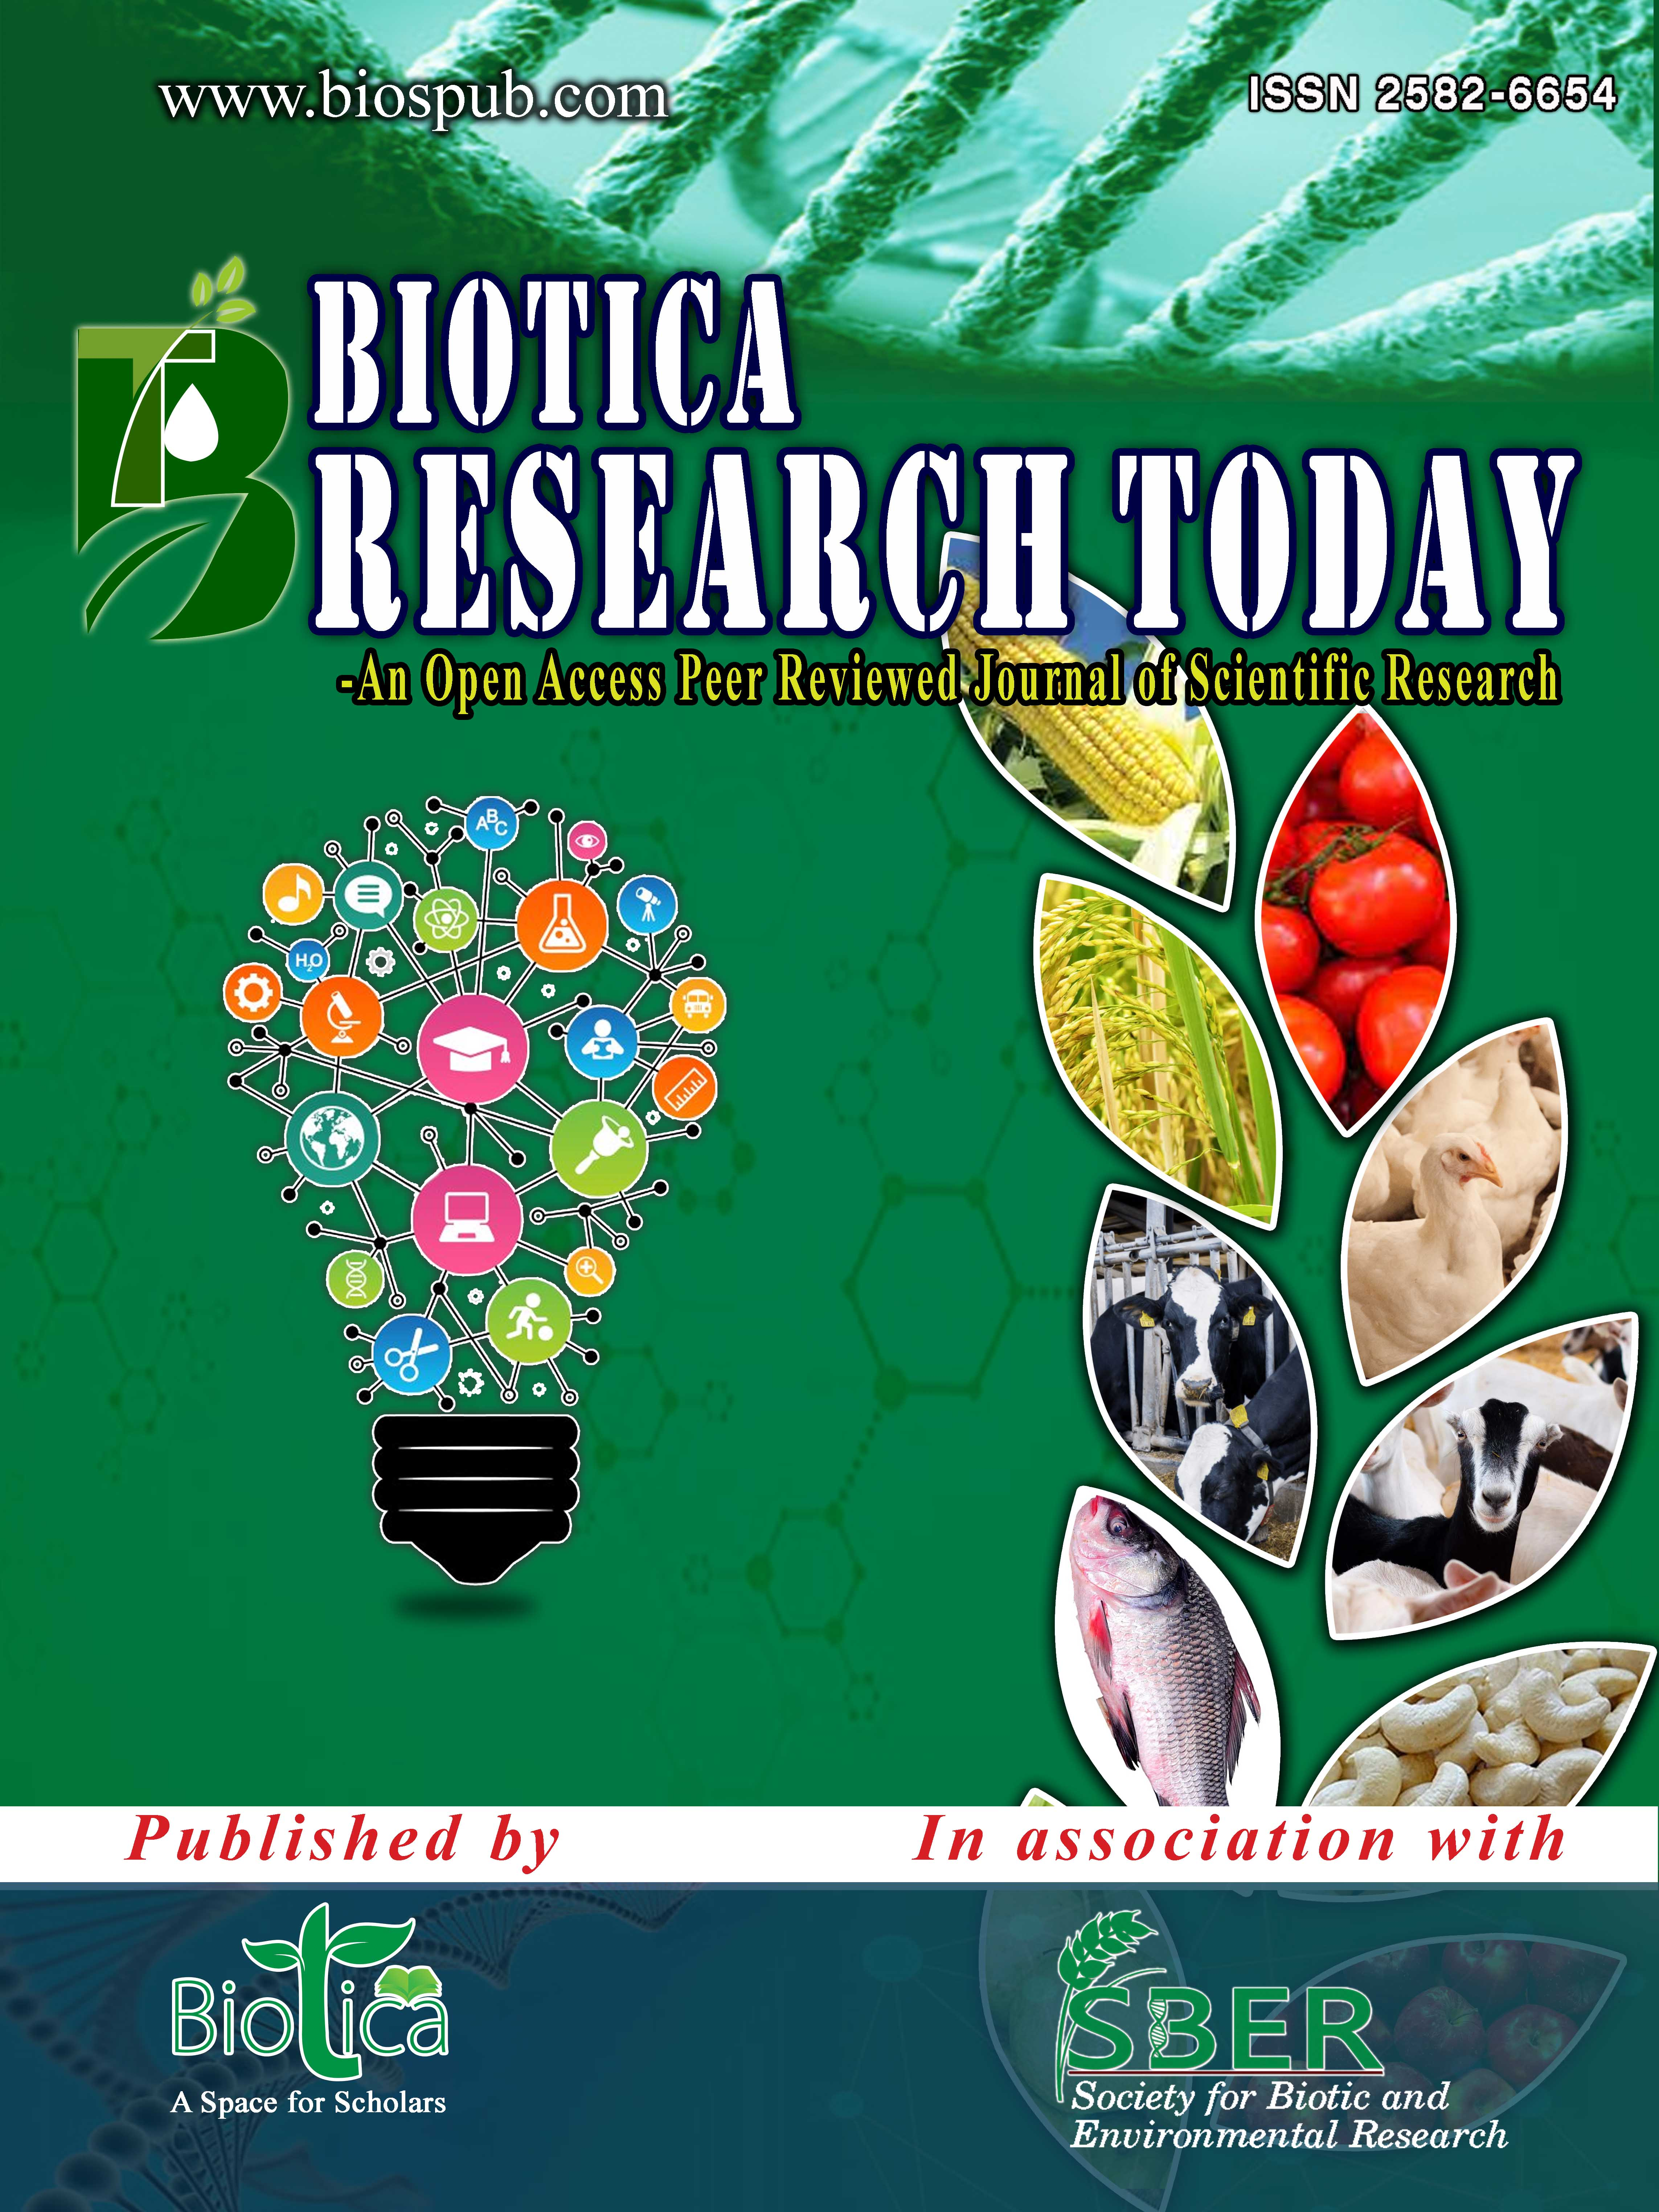 Research Biotica - An Open-Access Peer-Reviewed Journal of Scientific Research